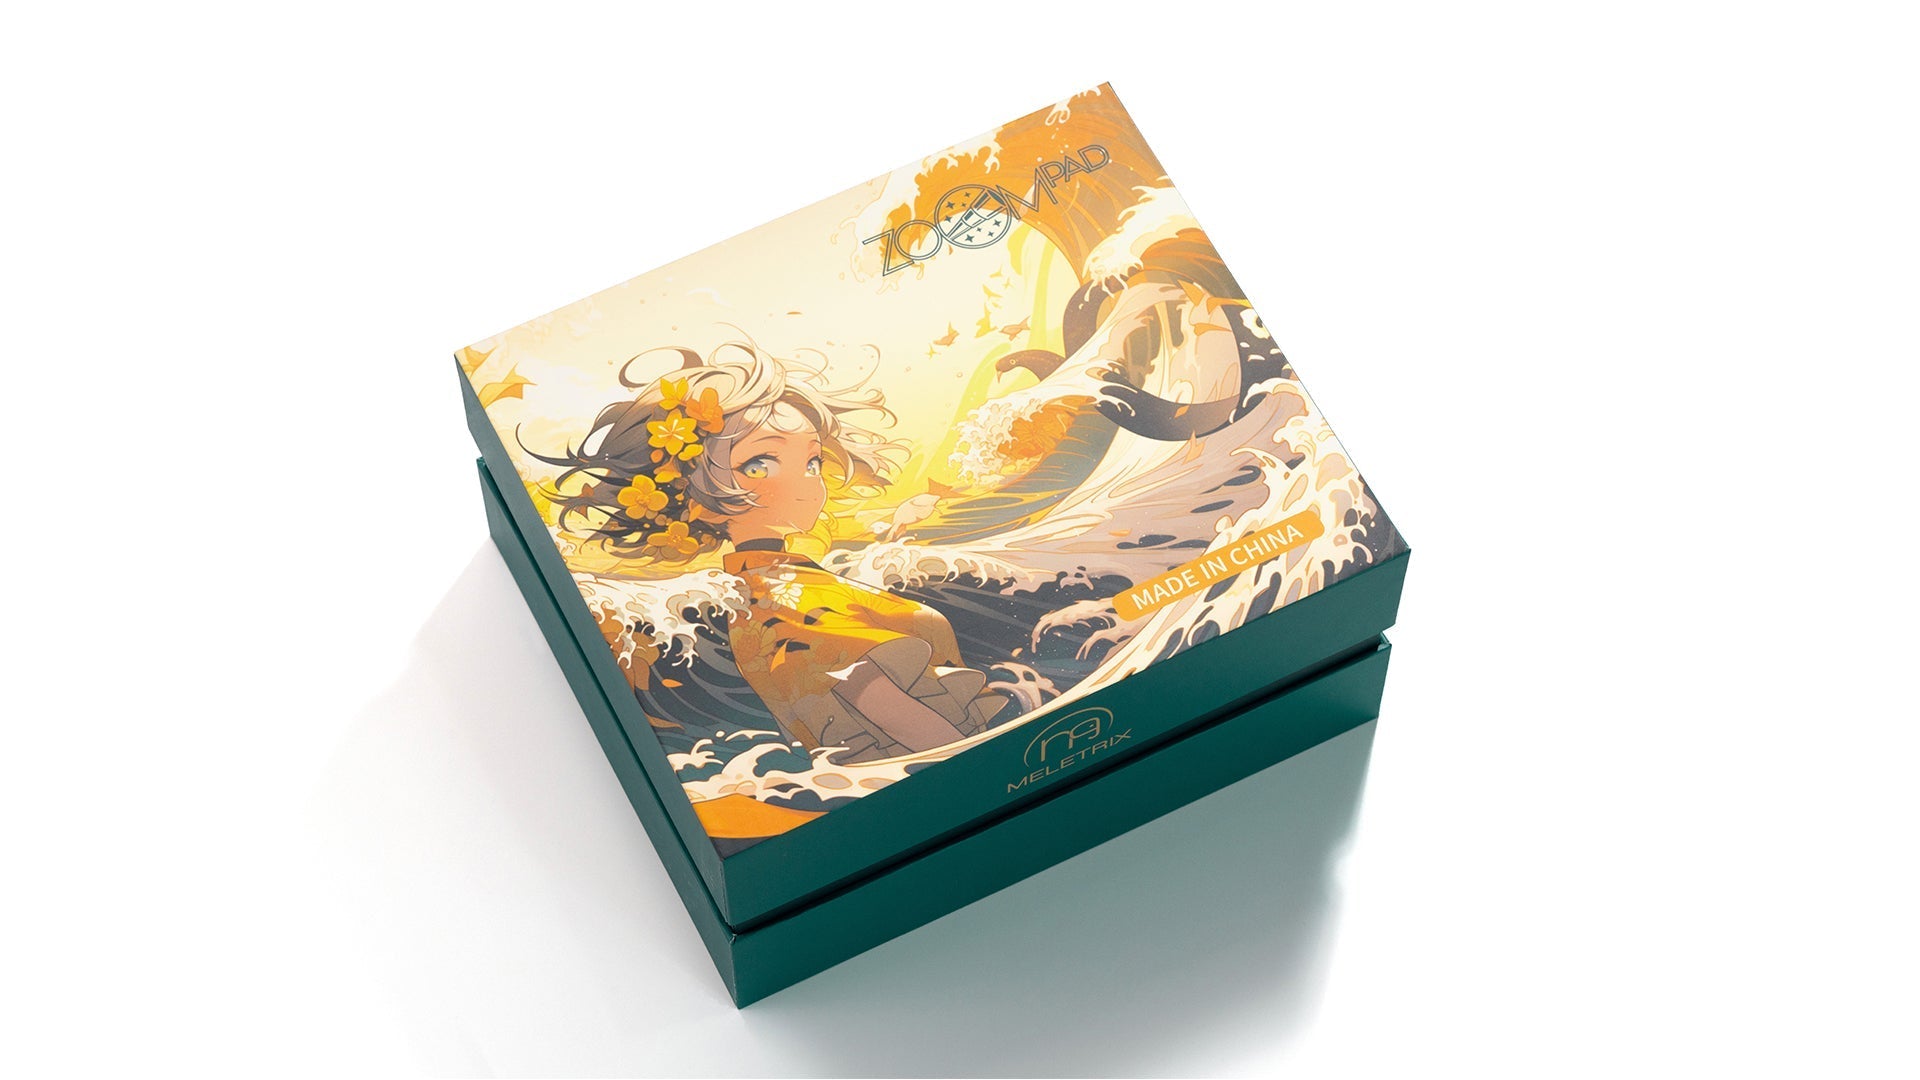 The Promised Neverland - Collector's Edition [Blu-ray]